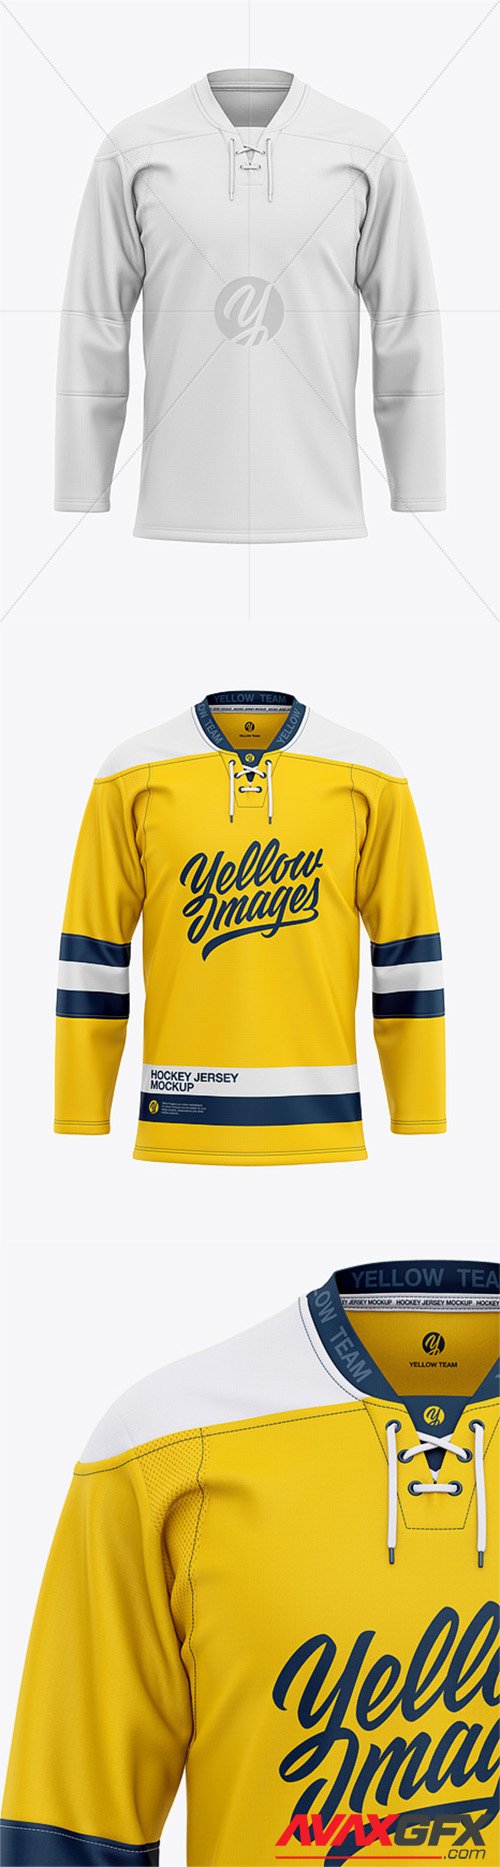 Download Men's Lace Neck Hockey Jersey Mockup - Front View 40199 » AVAXGFX - All Downloads that You Need ...